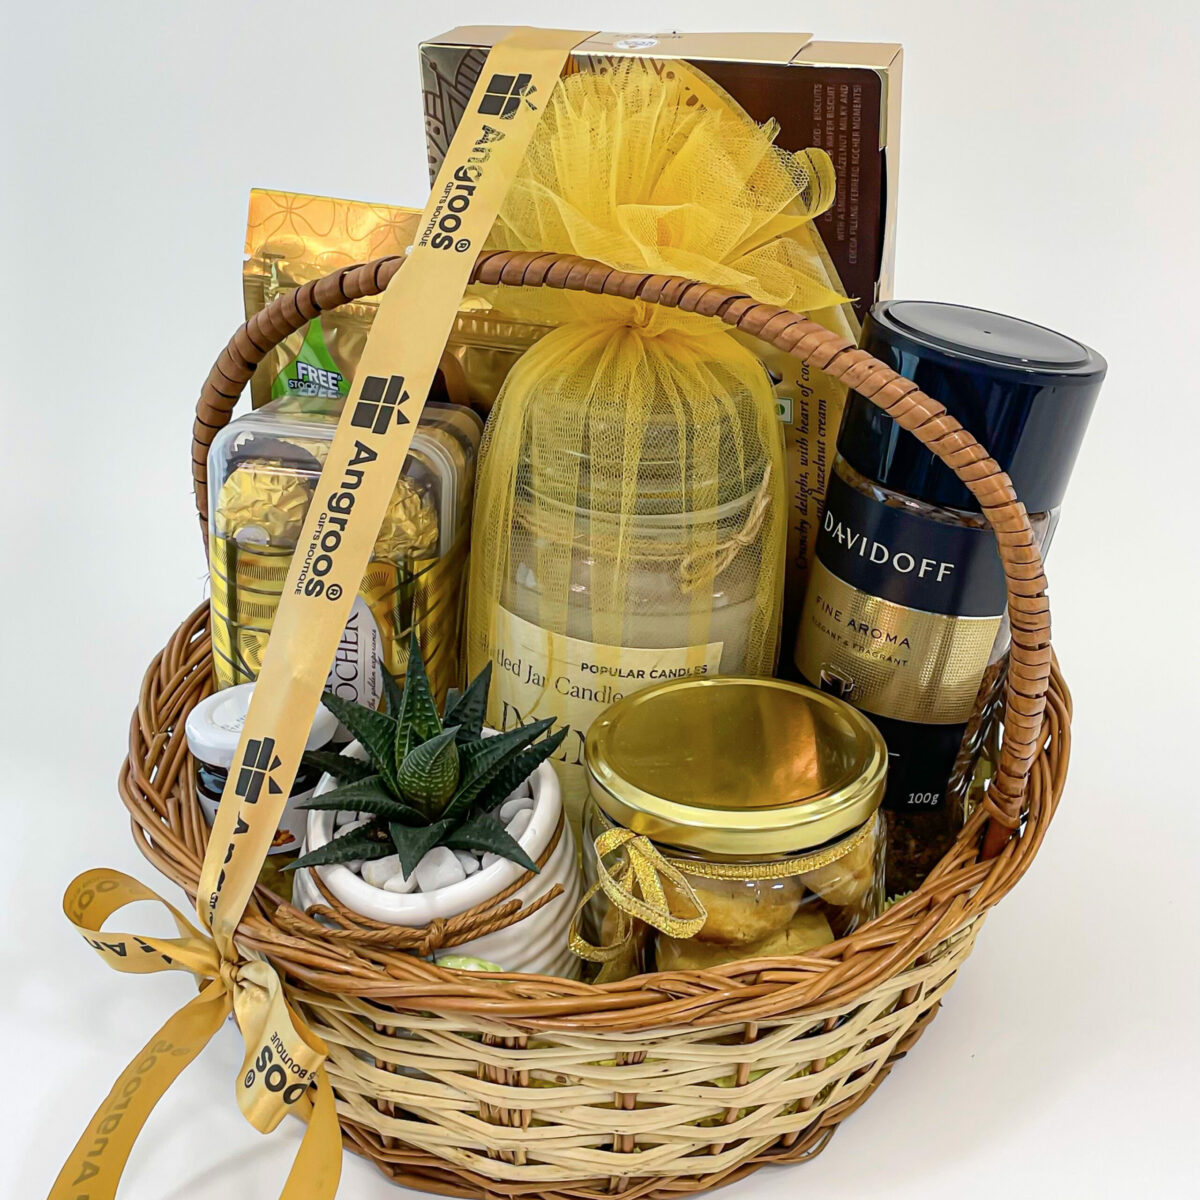 The gourmet basket from Switzerland, an ideal gift - NOW Village